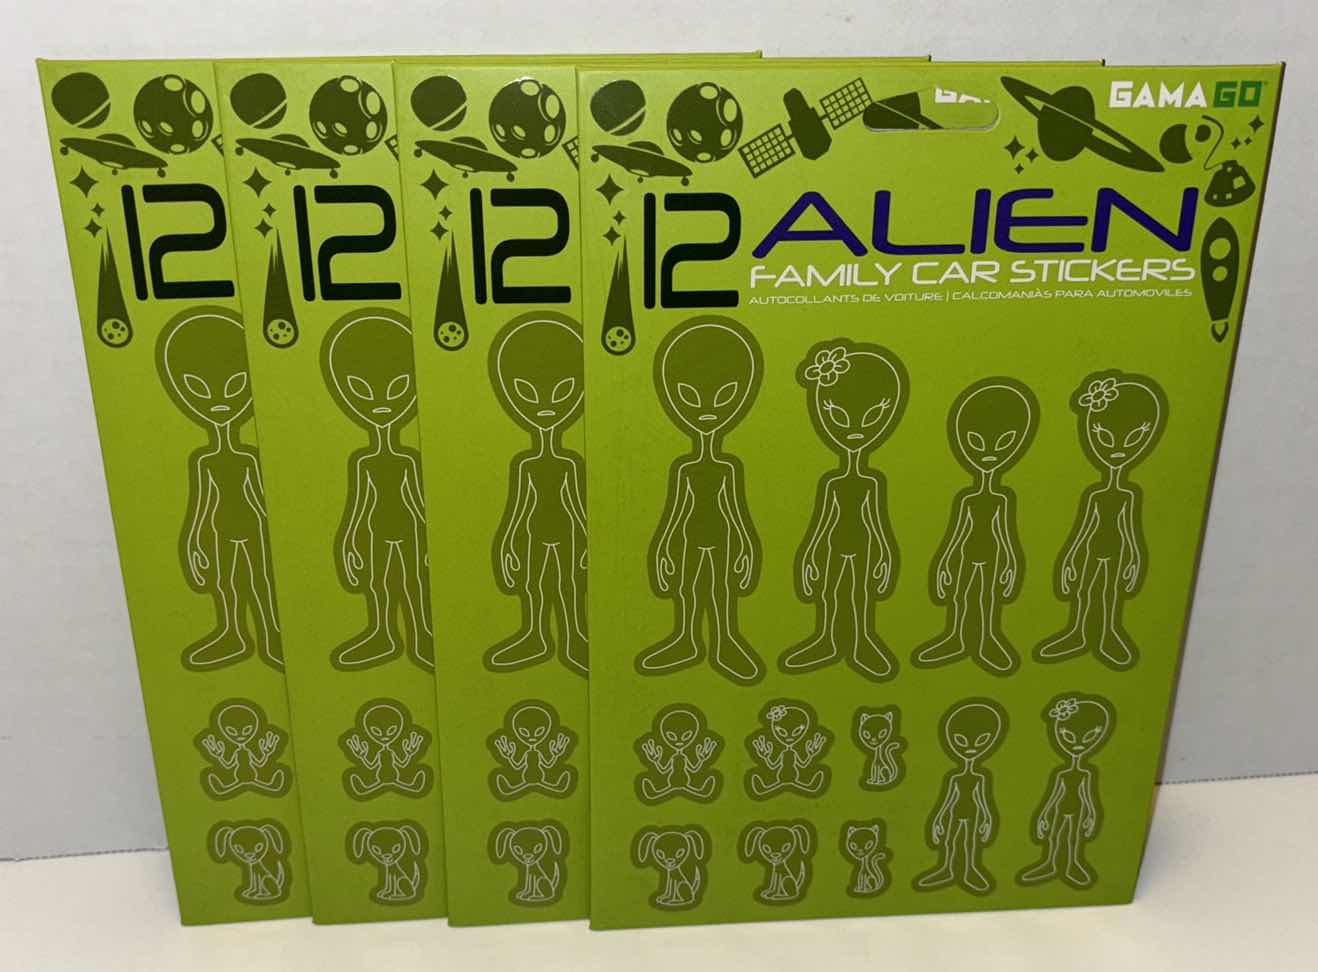 Photo 1 of NEW 4-PACK GAMA GO 12 ALIEN FAMILY CAR STICKERS PACK